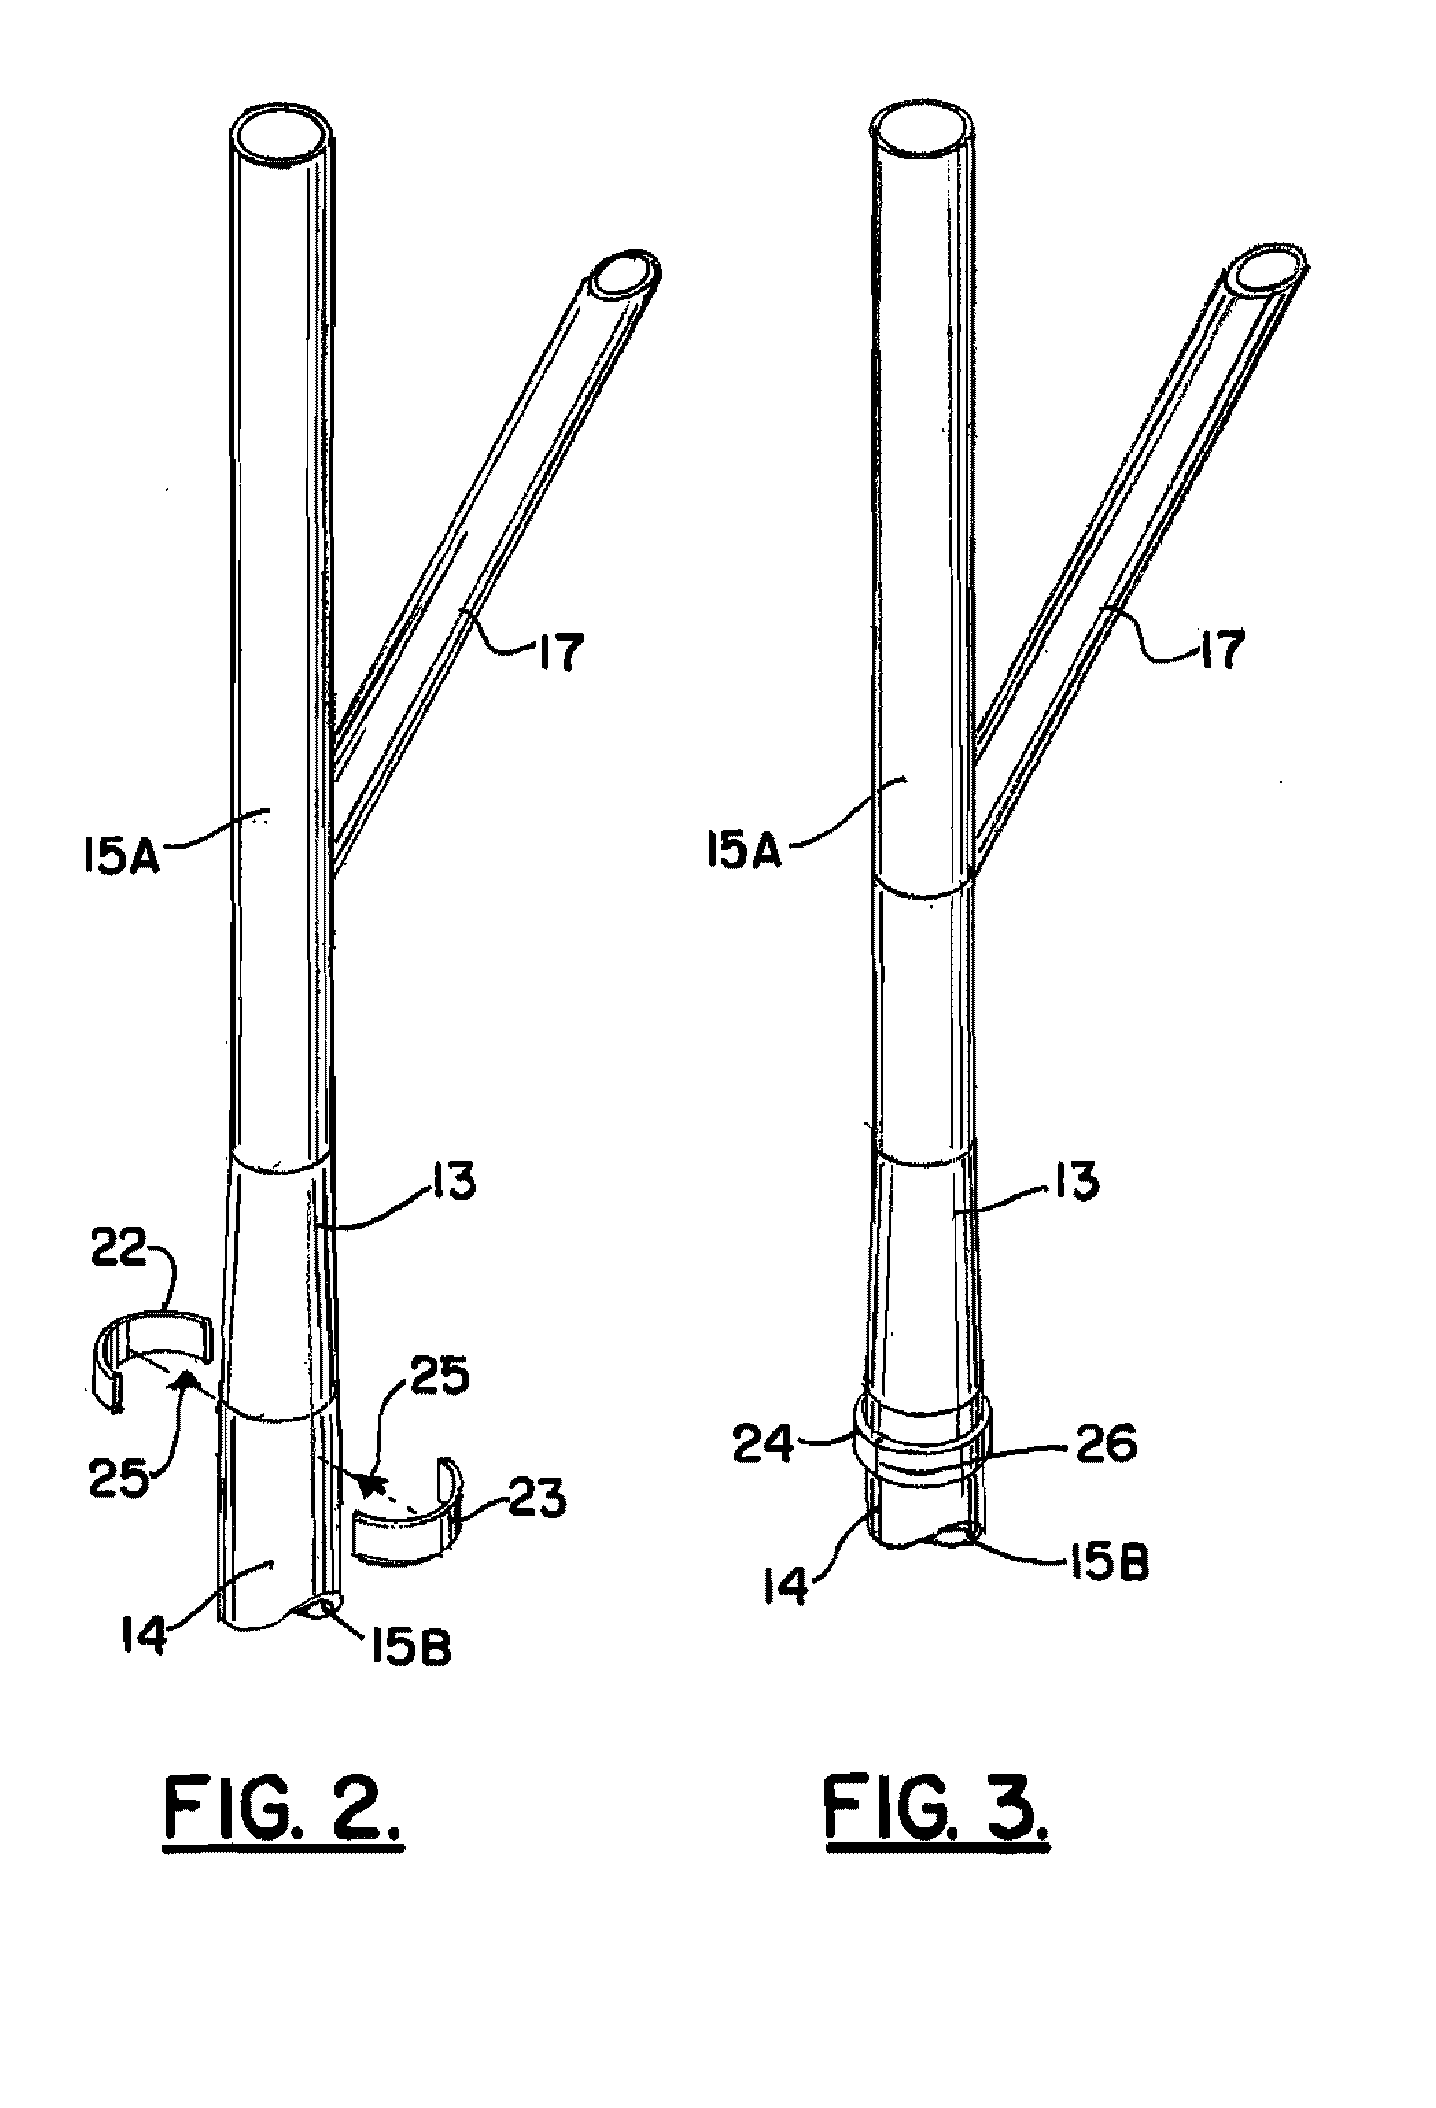 Method and Apparatus for Elevating a Marine Platform